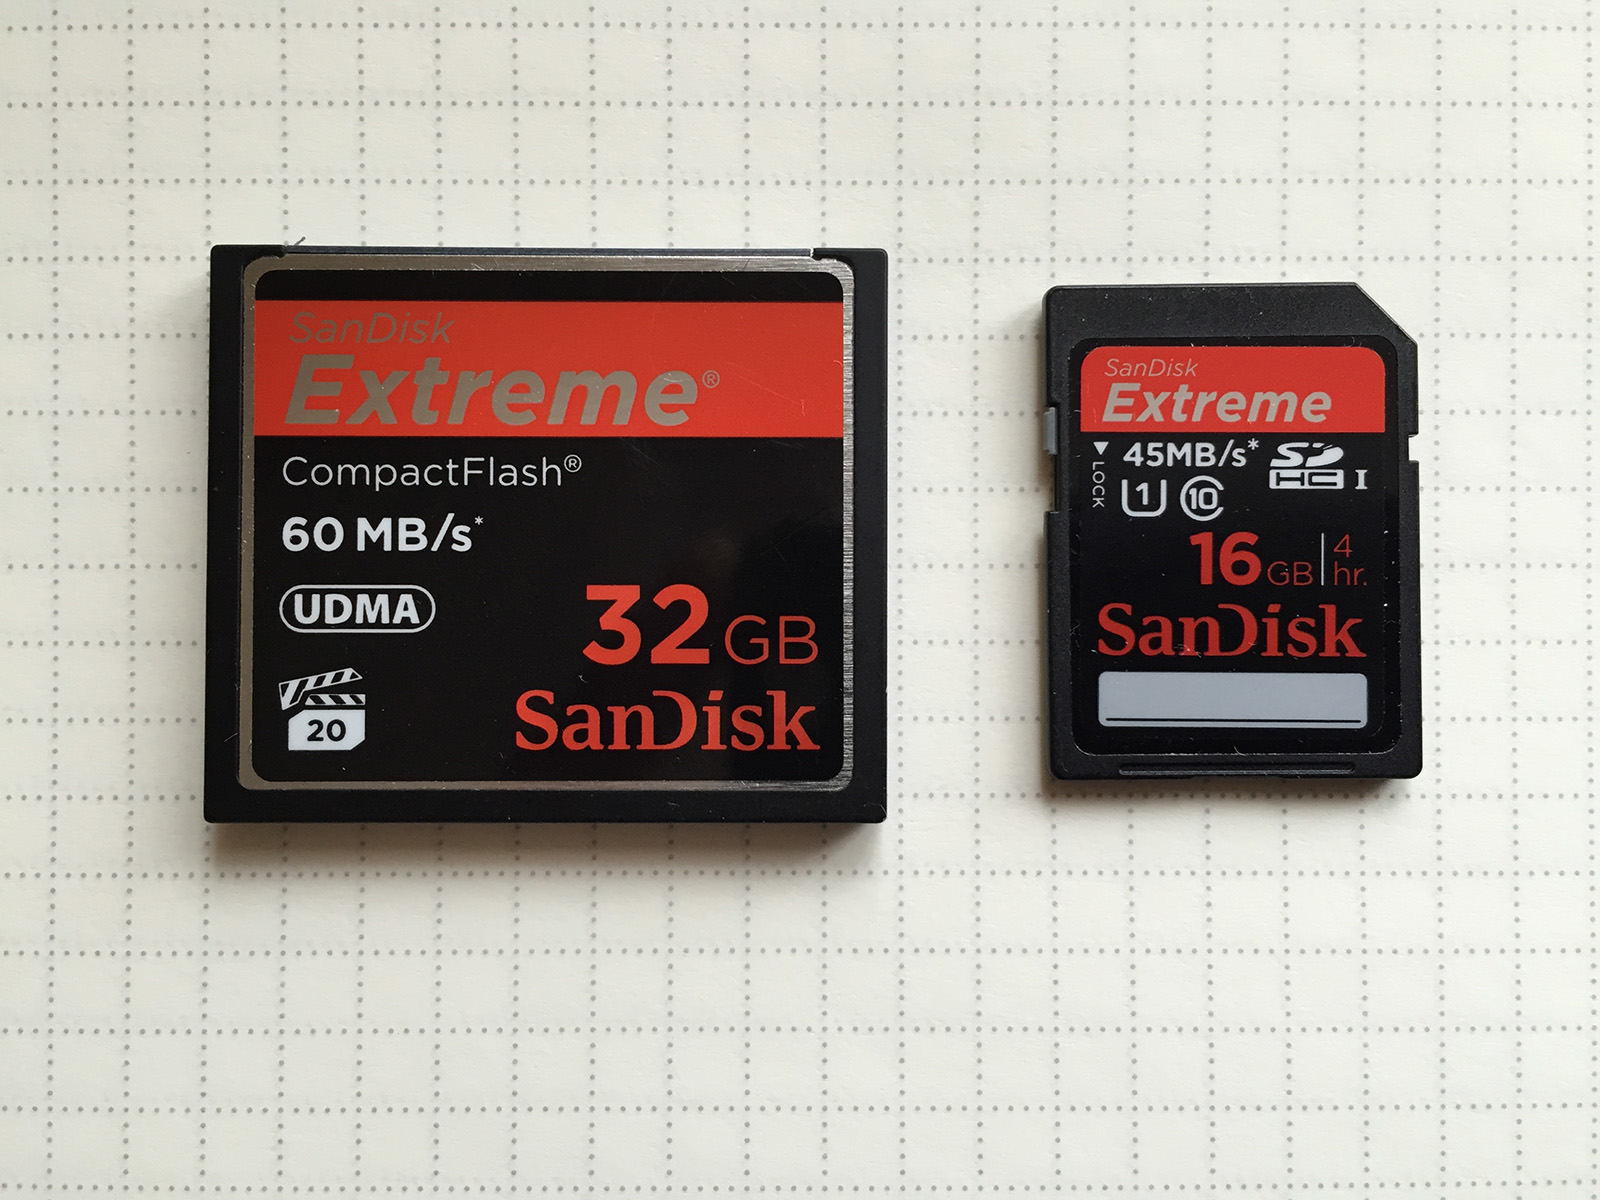 Buying the right memory card for your needs should be simple, but it isn't. The sales staff will convince you that only the fastest, biggest card will do, but that's far from the truth...  